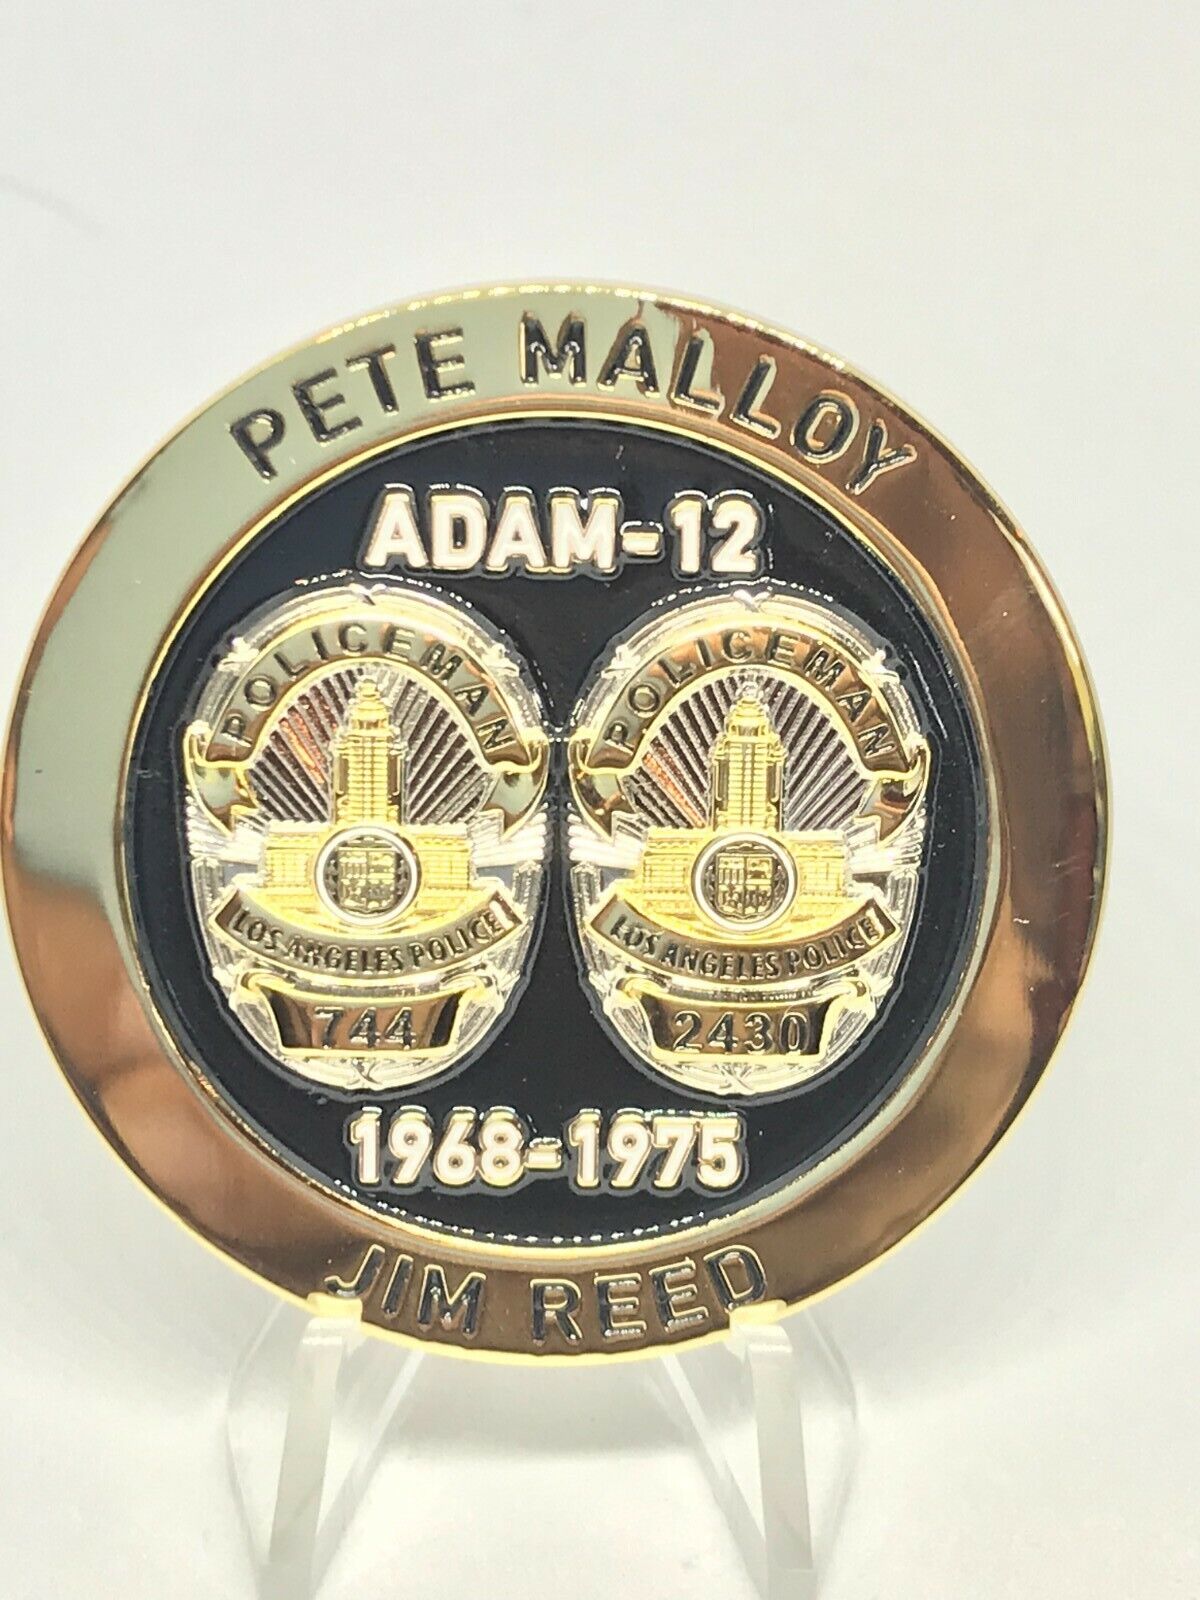 ADAM 12 - LAPD - Collectable Challenge Coin - Reed/Malloy - Limited